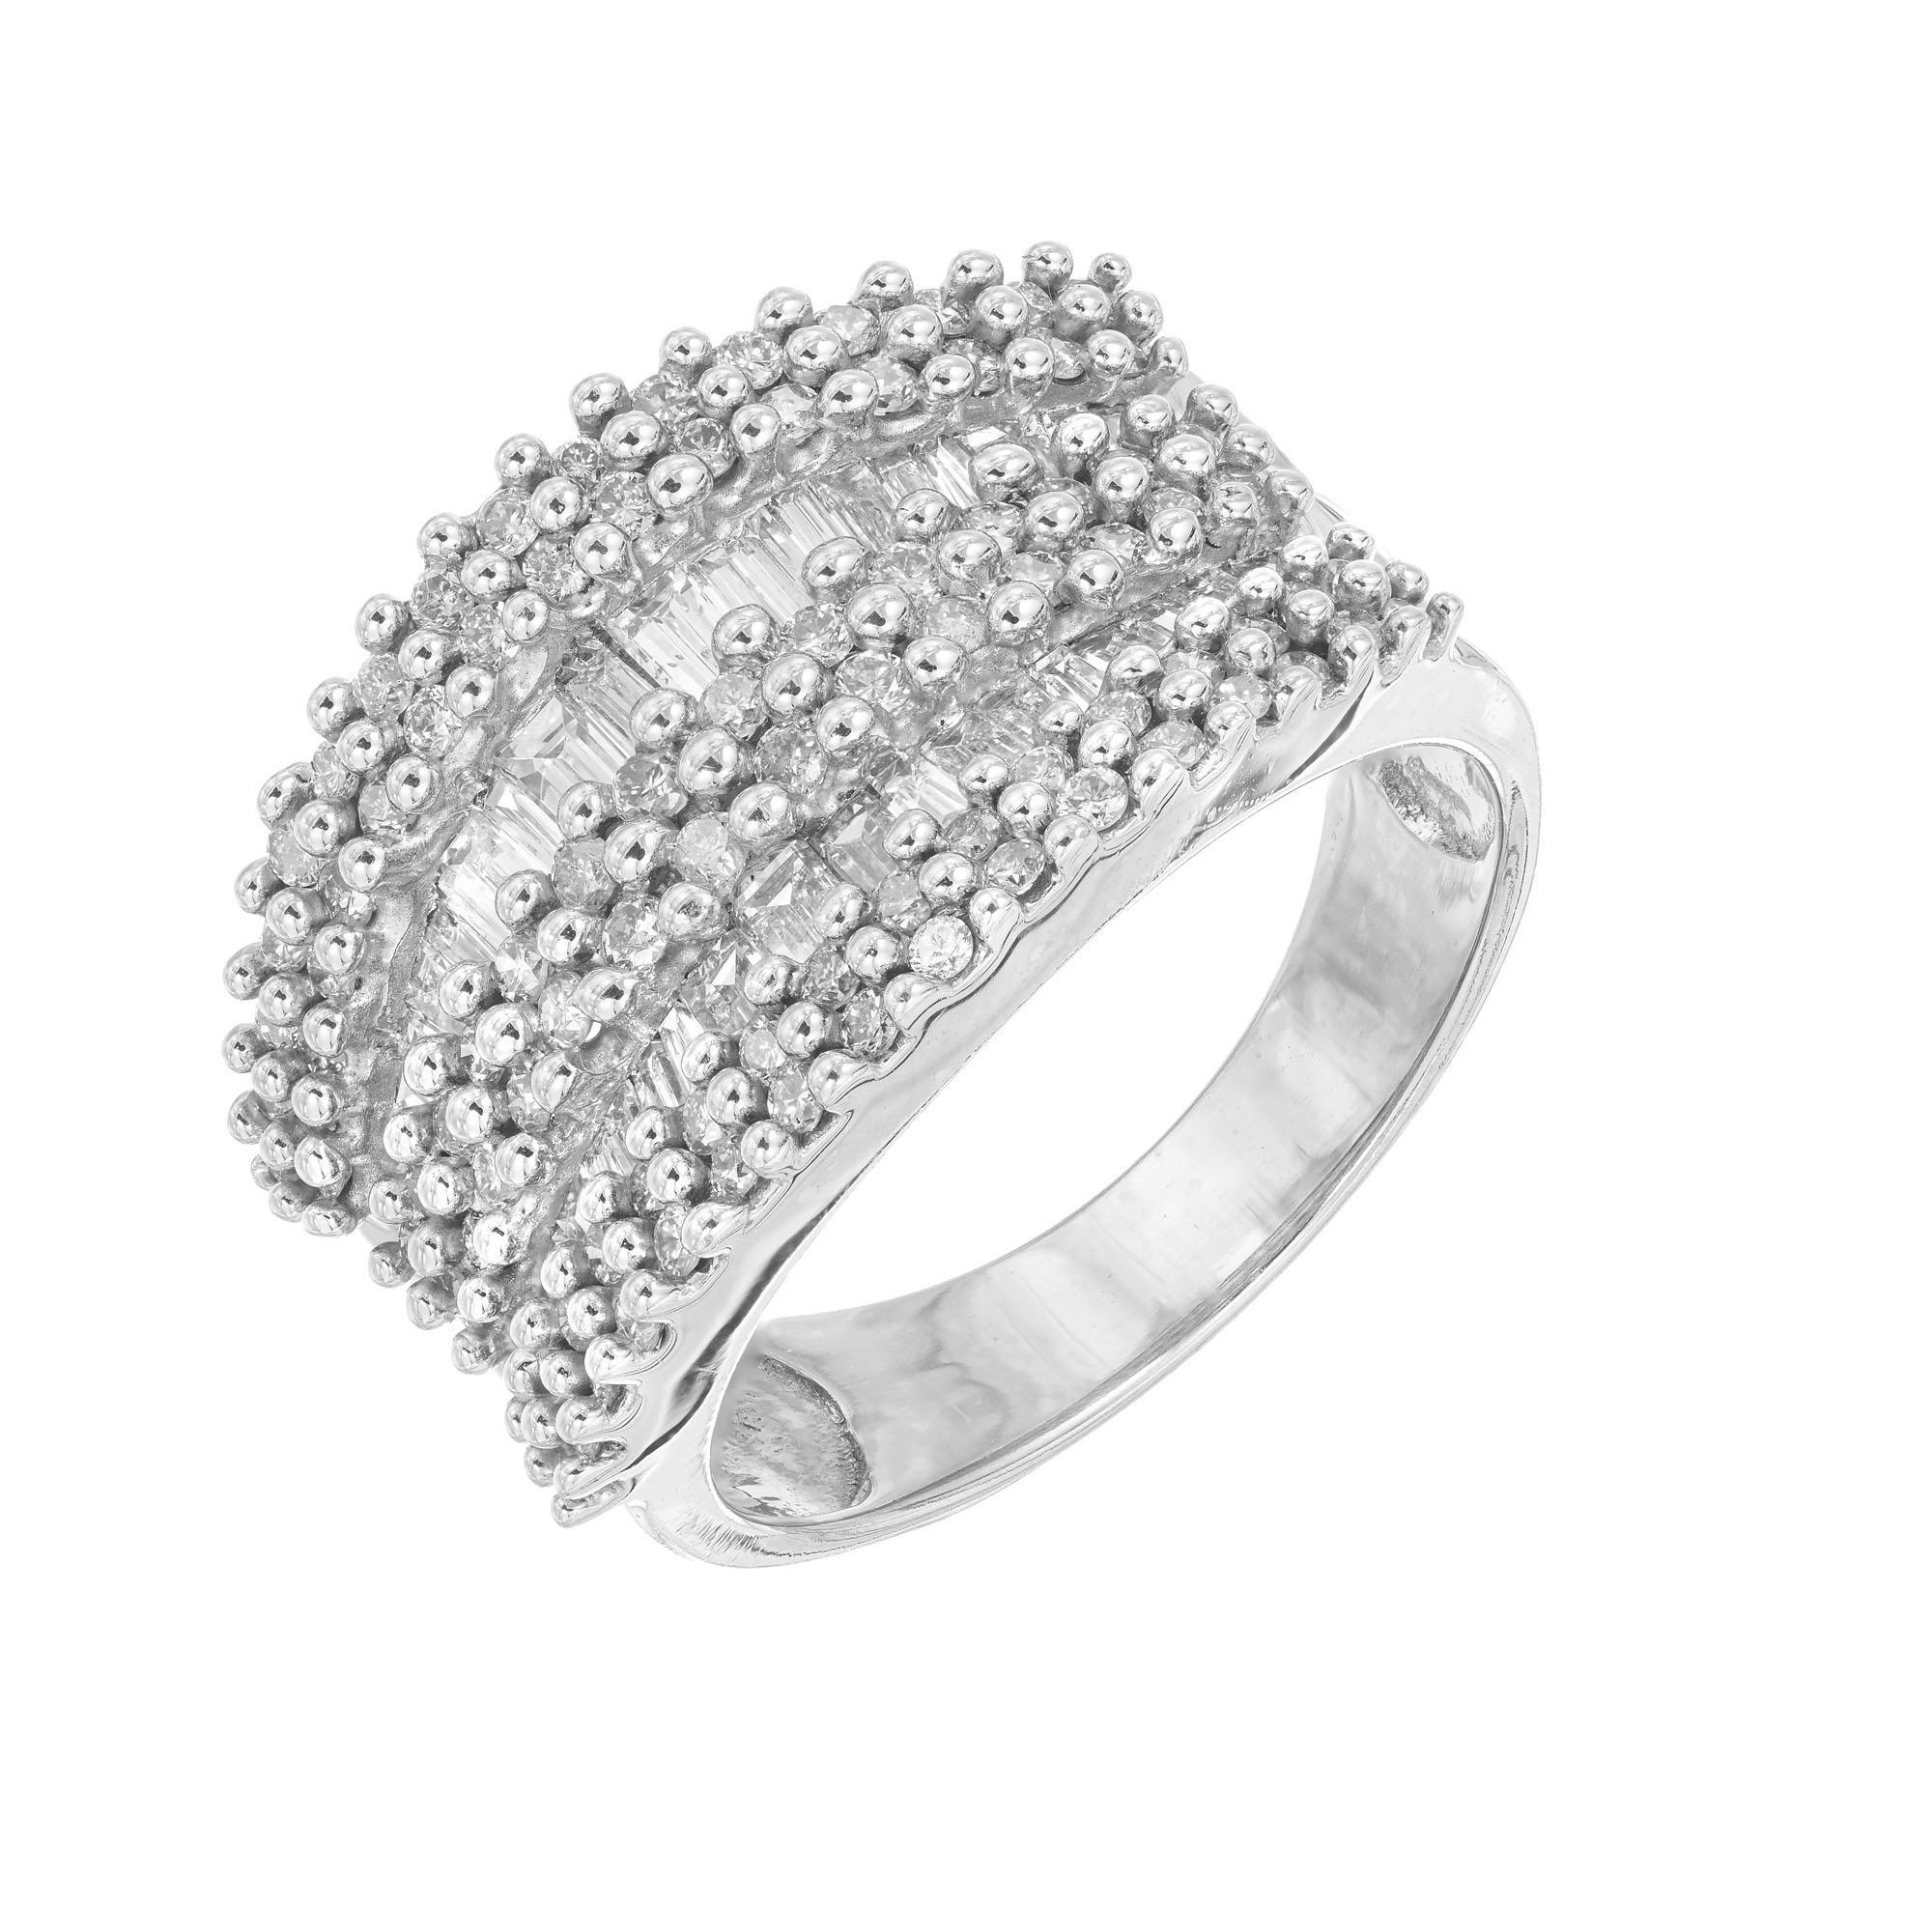 Diamond cluster band ring. 9 rows of round and baguette diamonds set in 14k white gold. 

98 round diamonds, approx. total weight 1.40cts, J-K, SI
36 baguette diamonds, approx. total weight .70cts, J-K, SI
Size 8 and sizable
14k White Gold
Stamped: